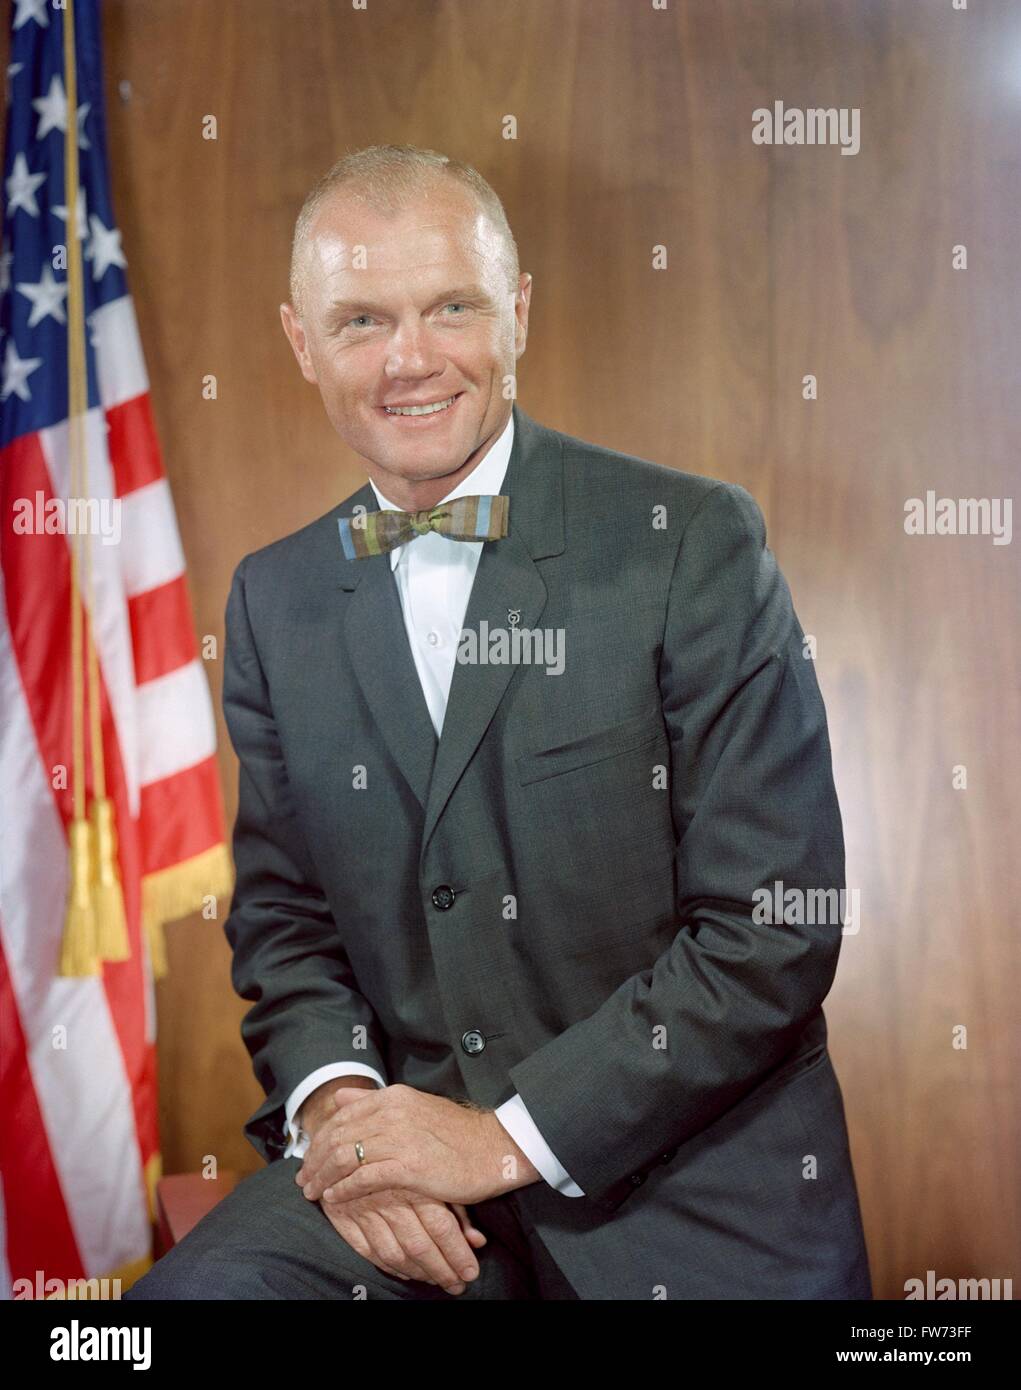 NASA Astronaut John Glenn portrait in suit and tie at the Johnson Space Center October 30, 1964 in Houston, Texas. Glenn became the first American to fly a manned orbital space flight aboard the craft. Stock Photo